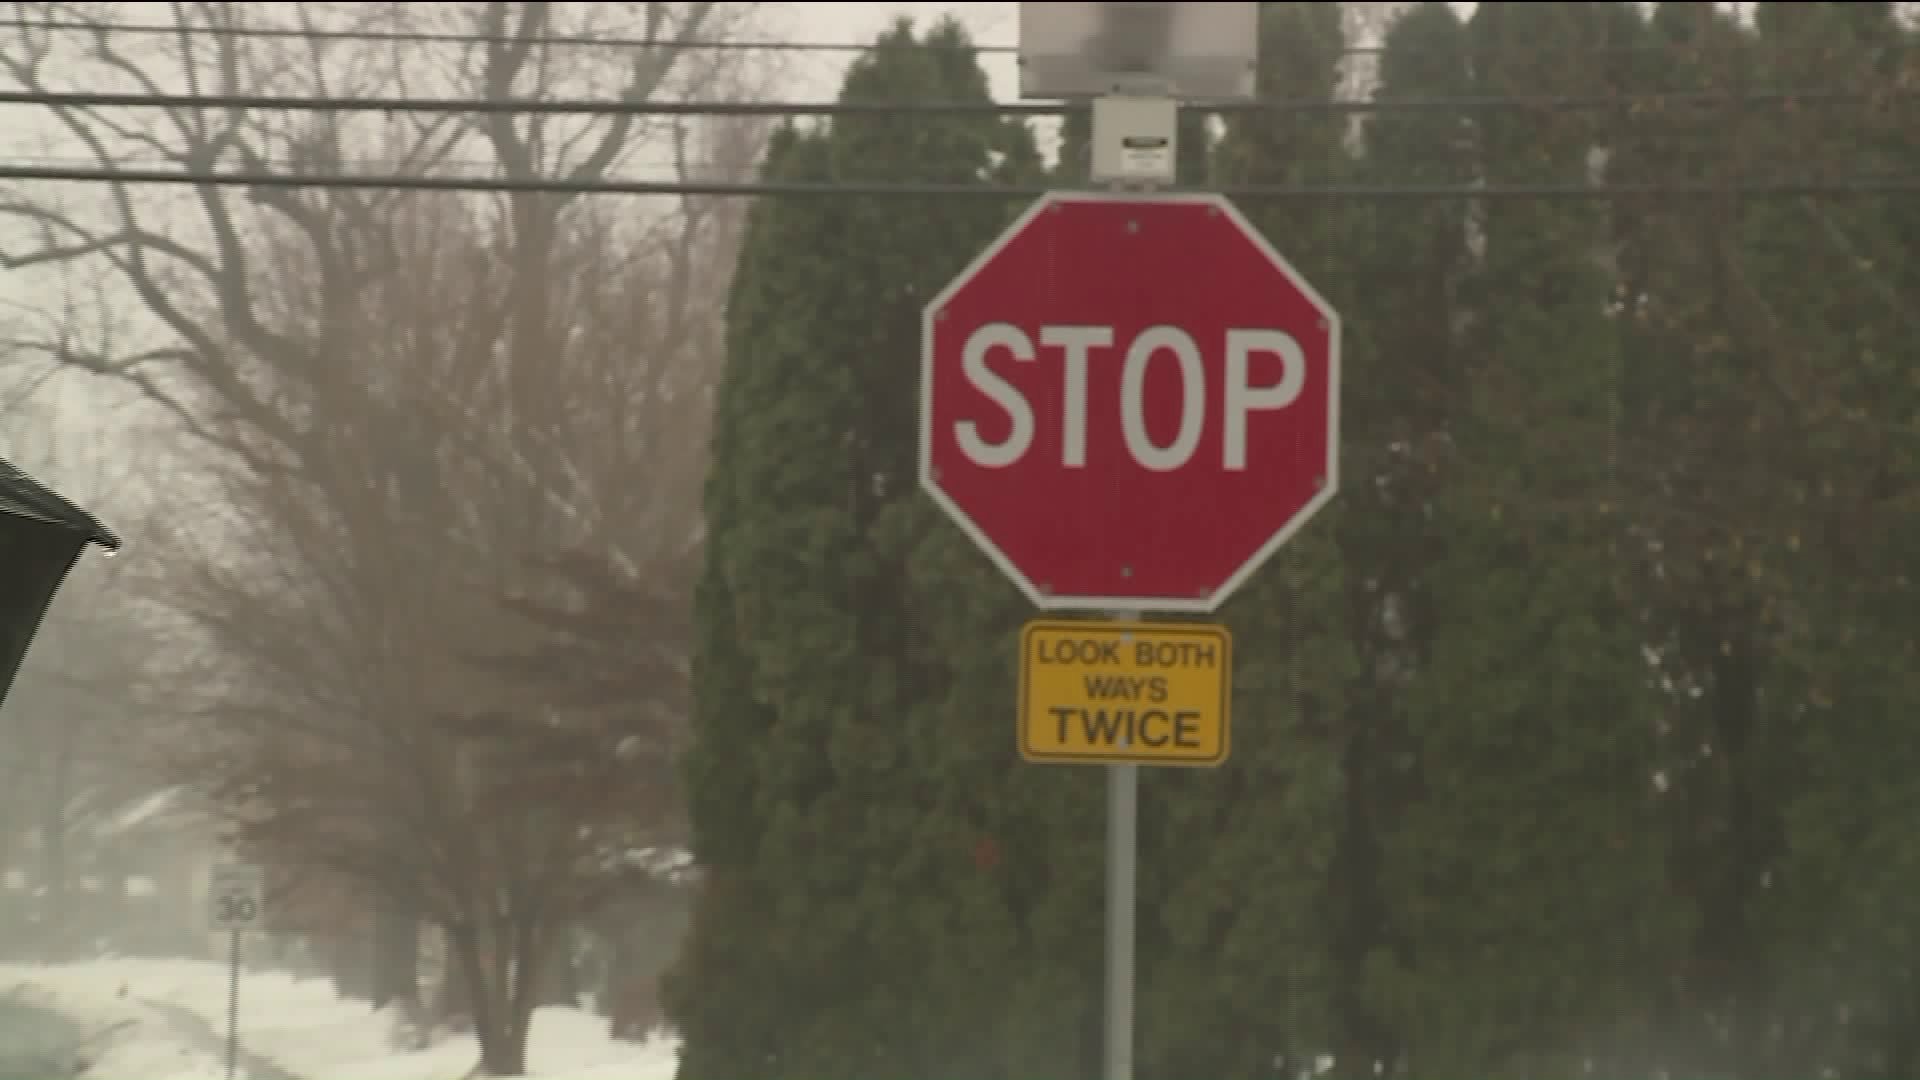 New safety measures coming to West Hartford intersection after multiple car crashes